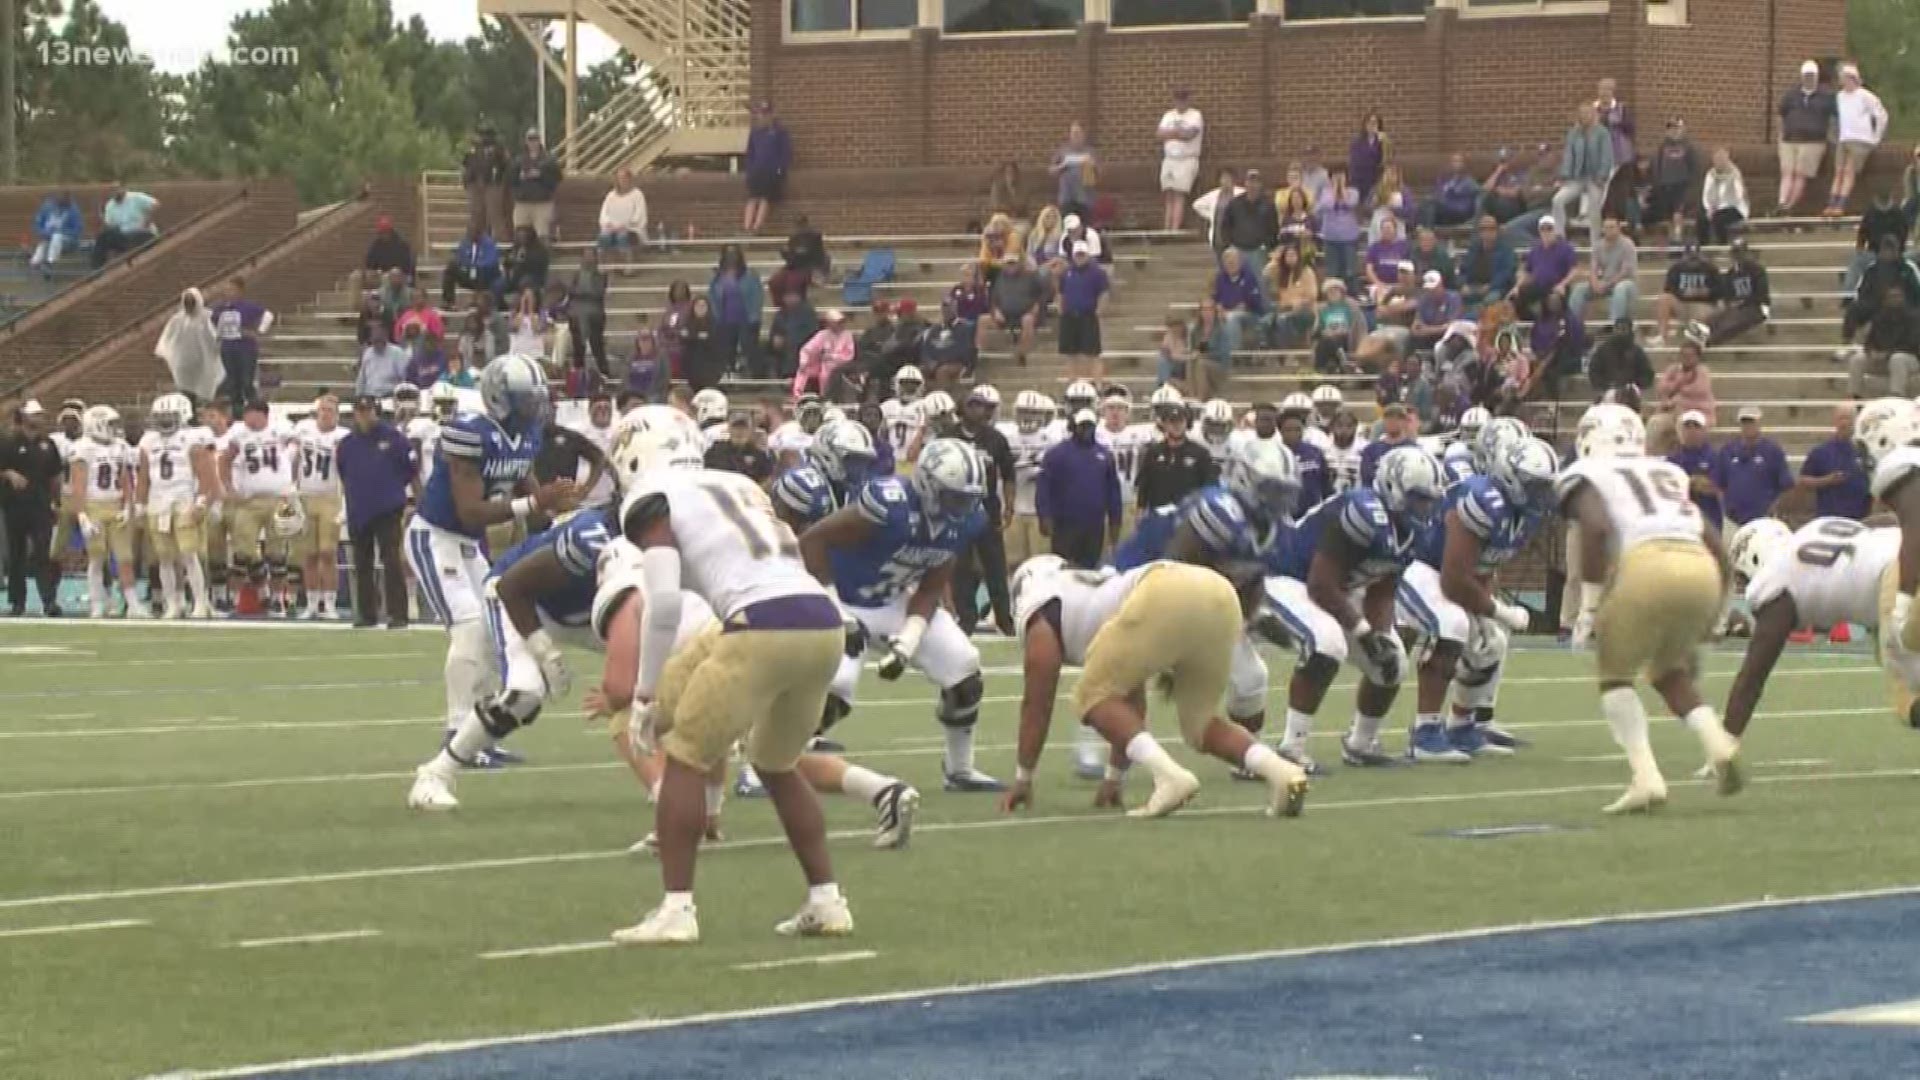 Deondre Francois had 347 yards passing for the Pirates to go with 3 touchdowns and ran for another on Saturday as Hampton won 40-34 over North Alabama.